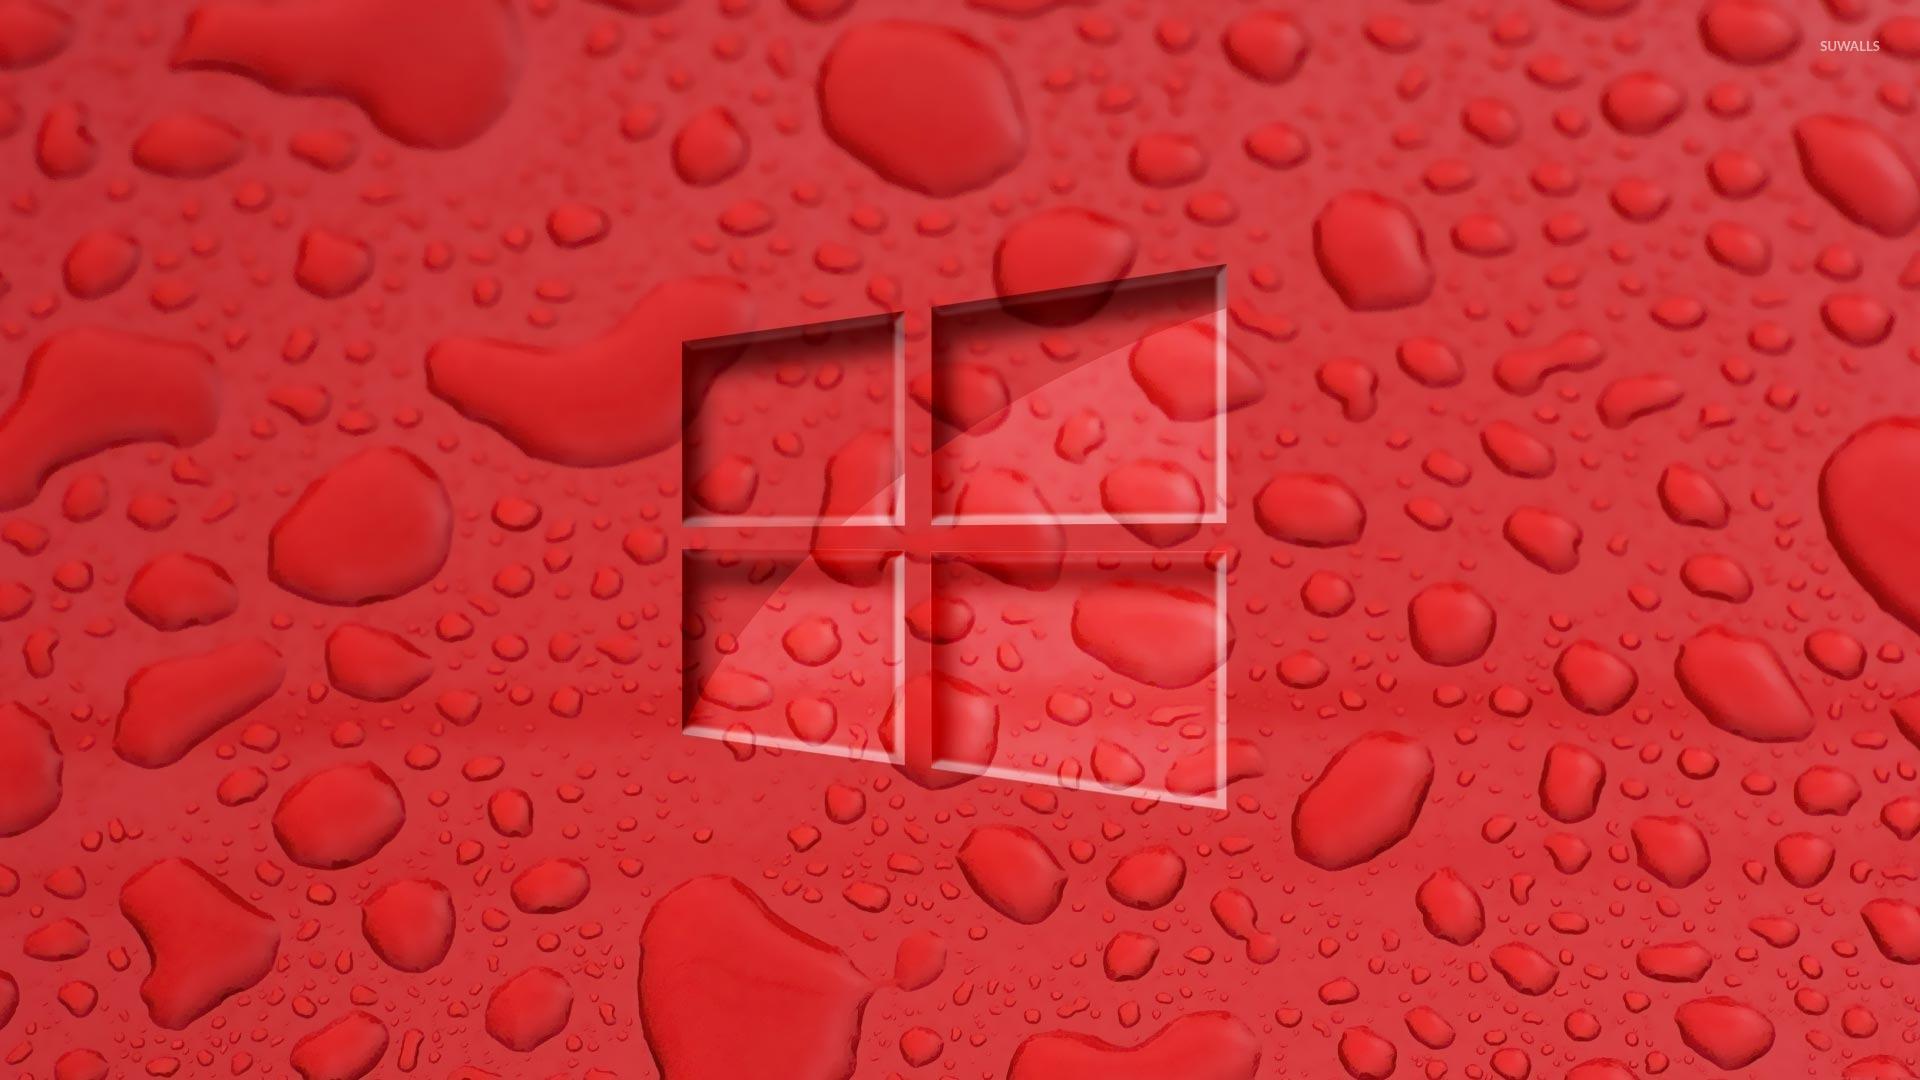 Windows 10 Red Wallpapers Wallpaper Cave